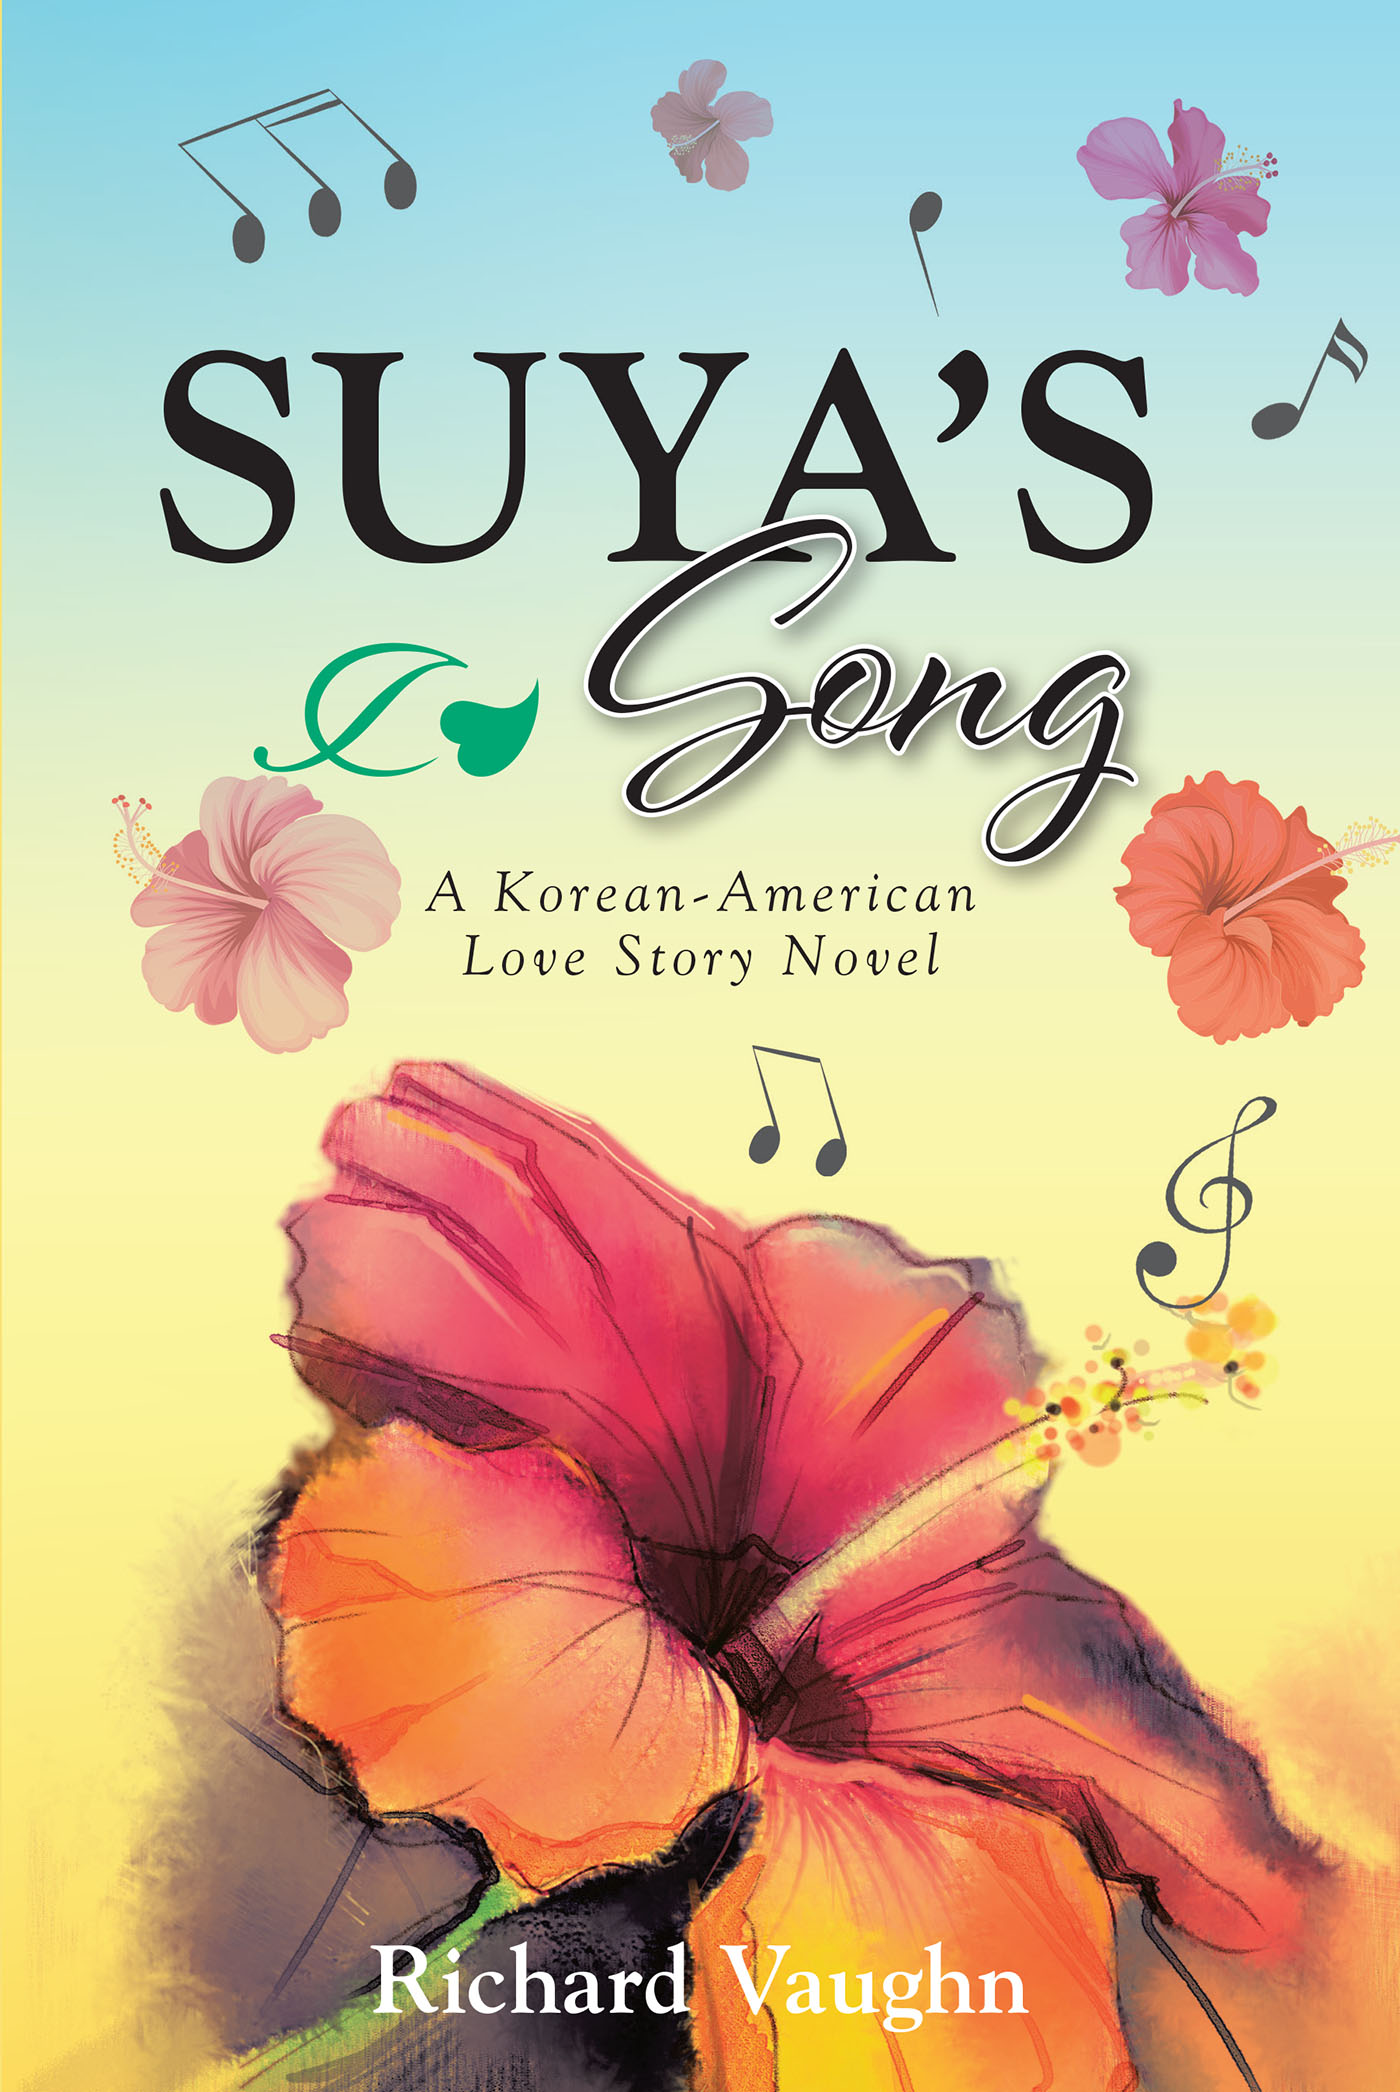 Richard Vaughn’s Newly Released “SUYA’S Song: A Korean-American Love Story Novel” is a Fictionalized, Romantic Celebration of the Author’s Beloved Wife